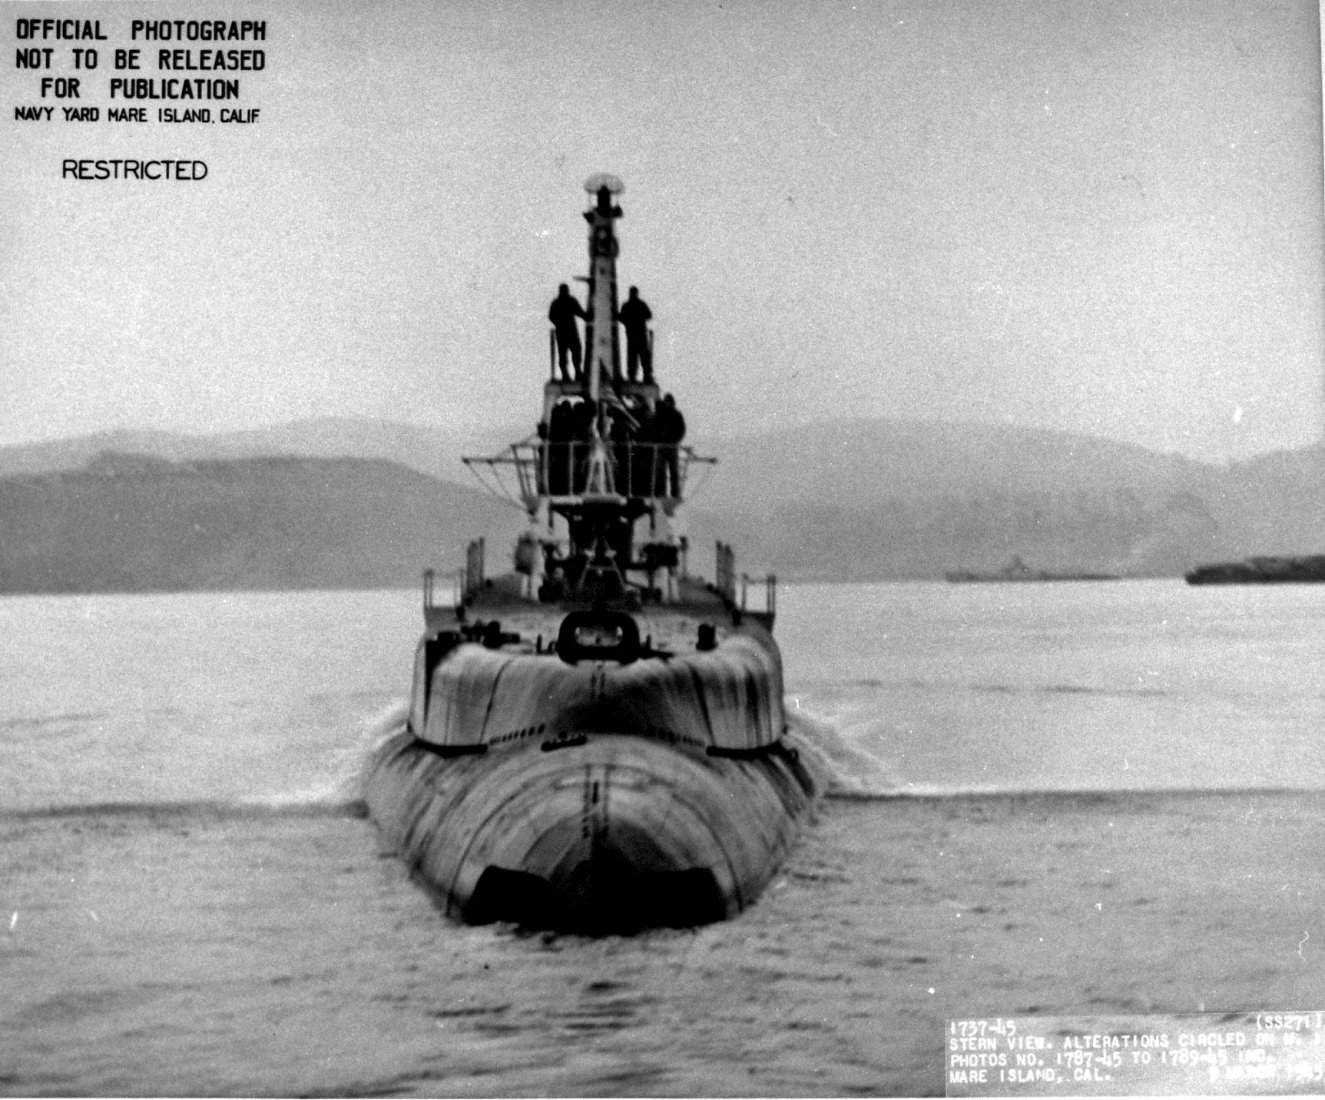 Stern view of USS Ray, Mare Island Naval Shipyard, Vallejo, California, United States, 9 Mar 1945